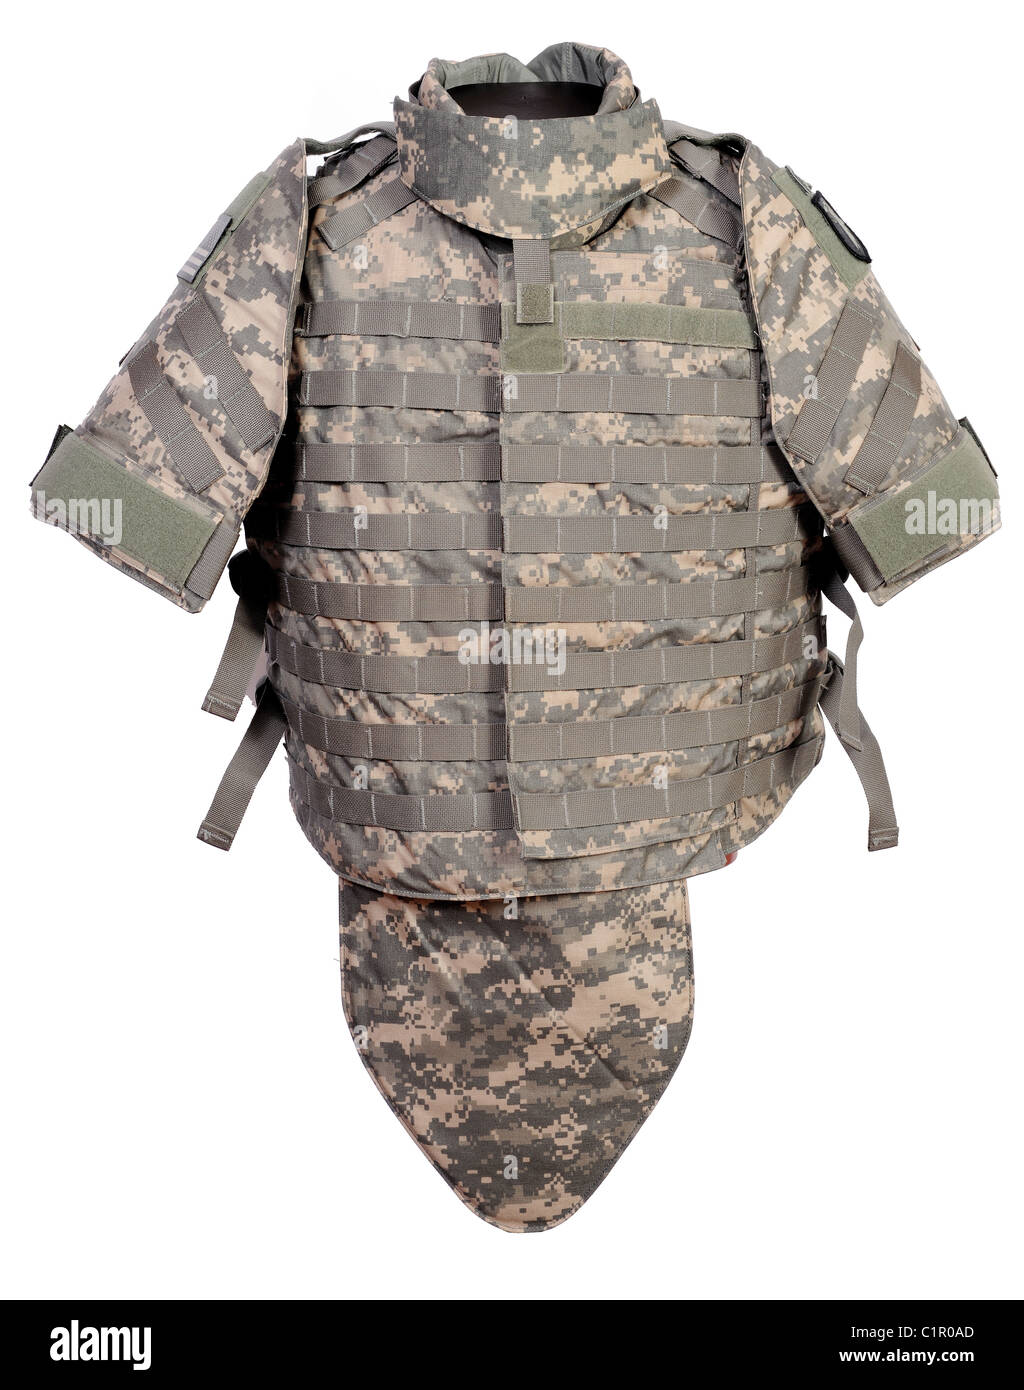 American military inteceptor body armour as used in Afghanistan and Iraq. Stock Photo